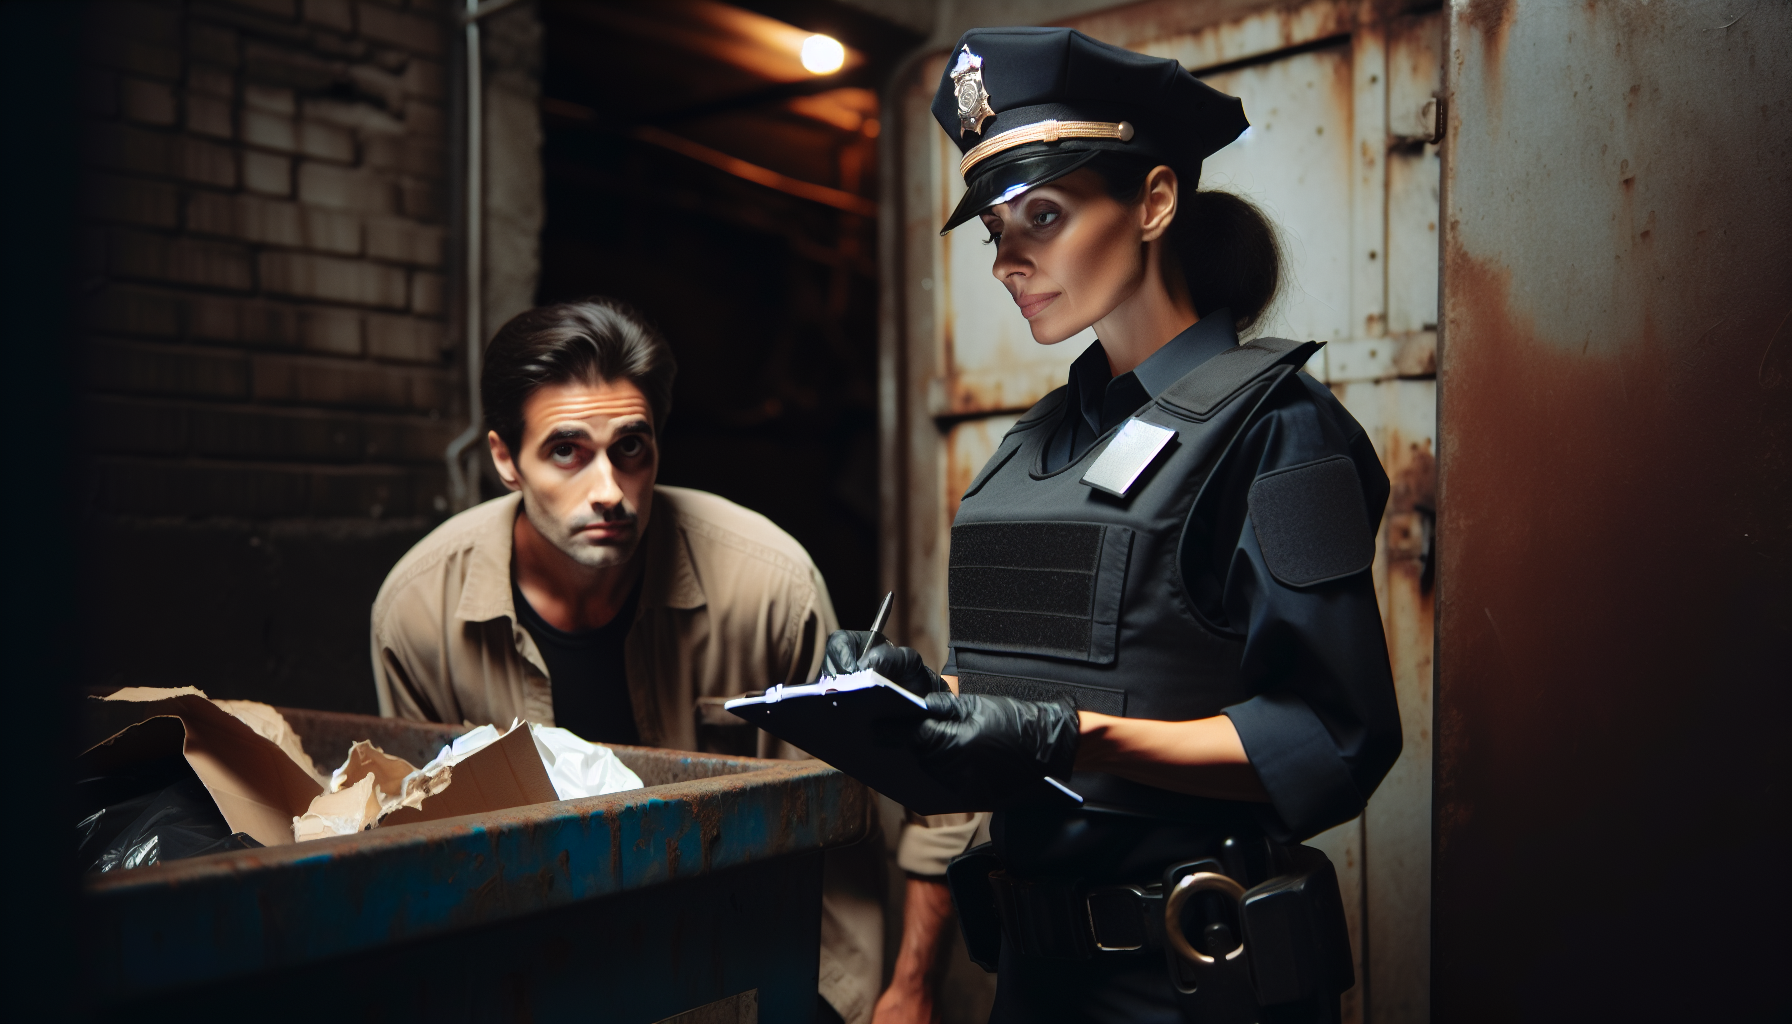 Police officer issuing a warning to a person dumpster diving